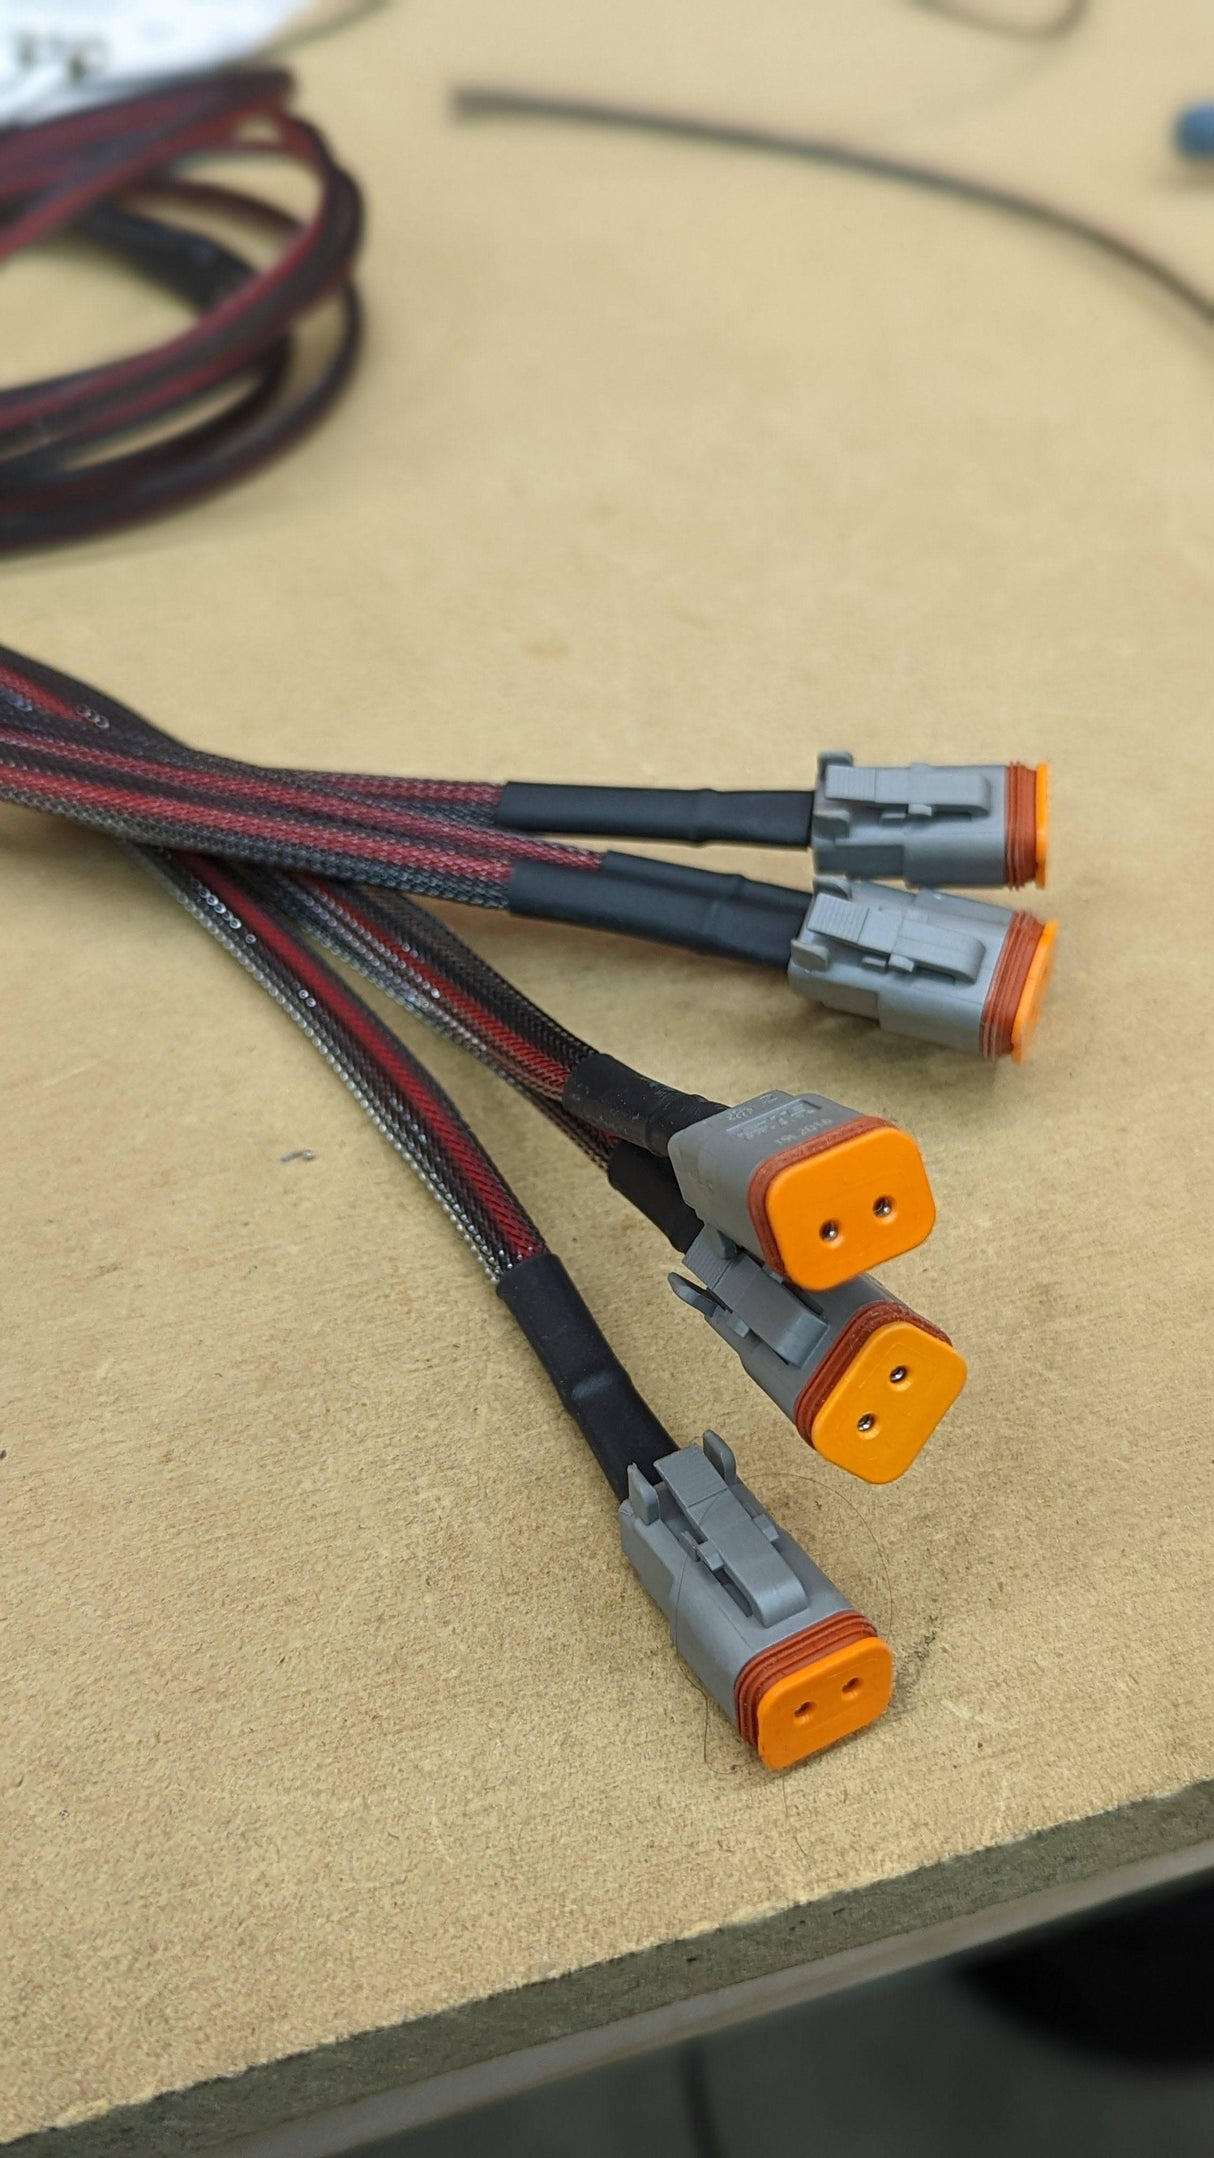 Mid-Size Vehicle Blaze Off-Road Pre-Made Wiring Harnesses - Blaze Off-Road